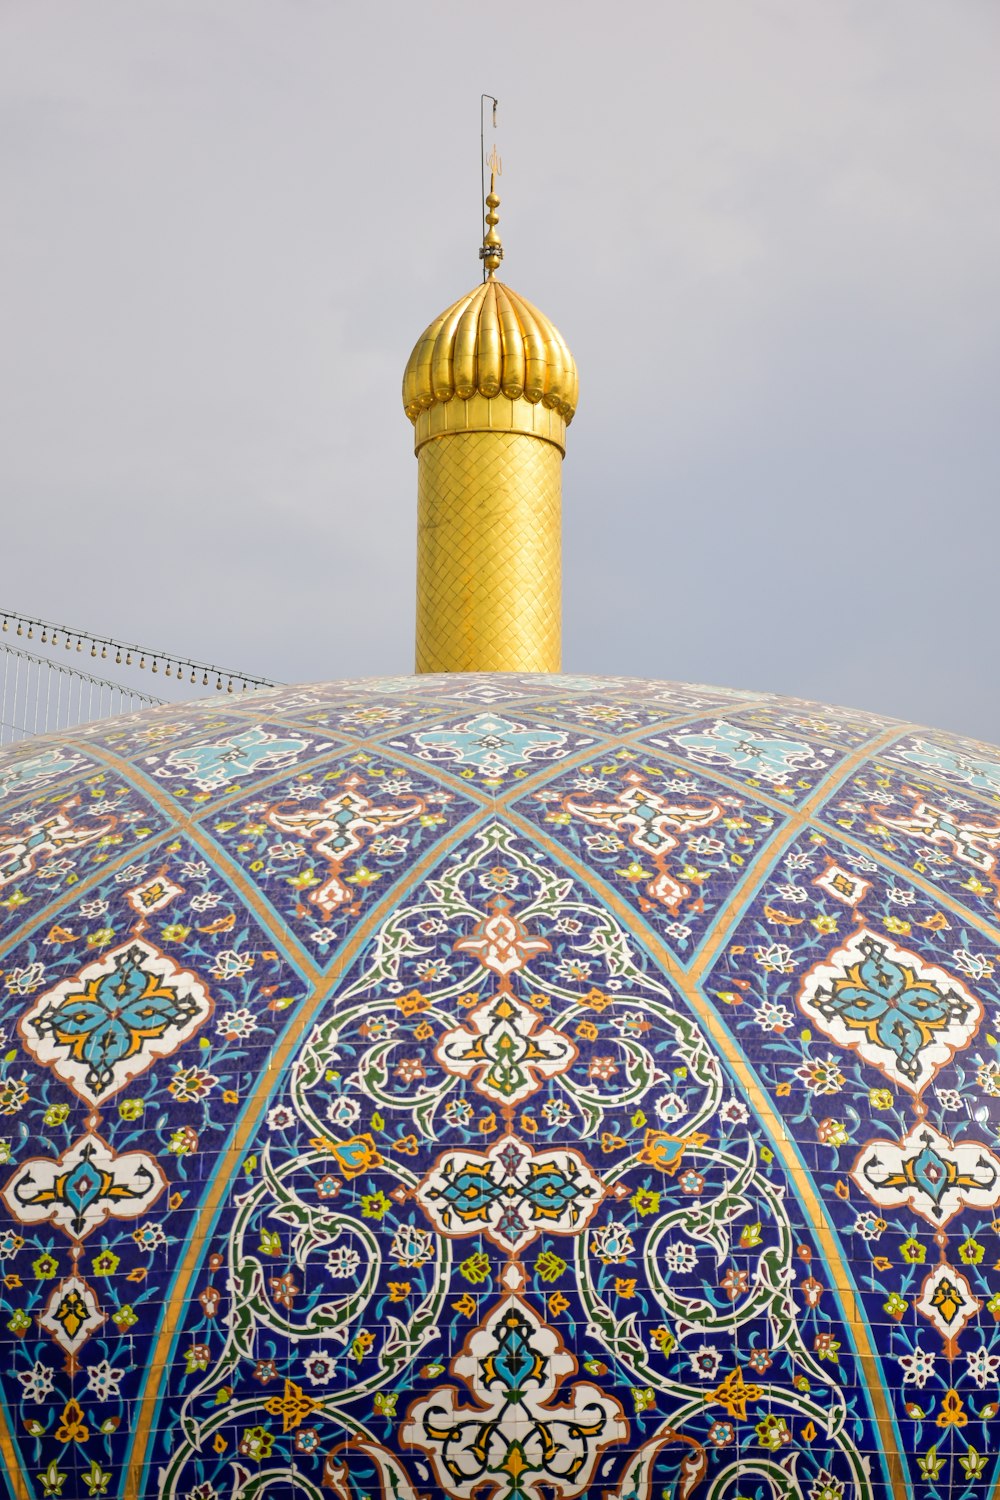 blue and gold dome building